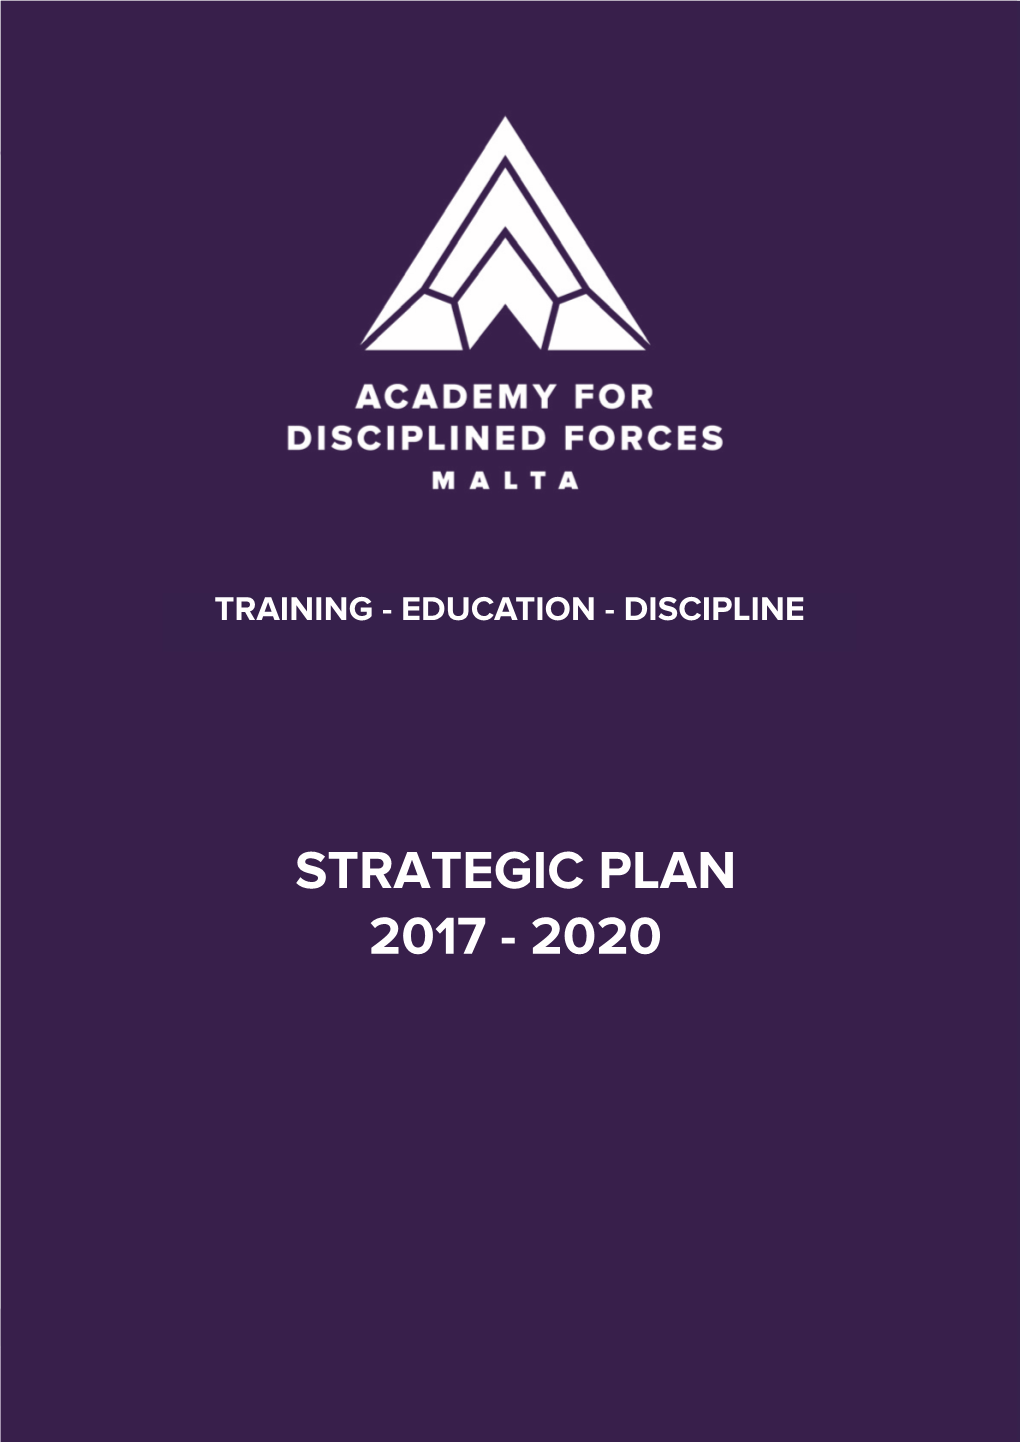 Academy for Disciplined Forces Strategic Plan 2017-2020